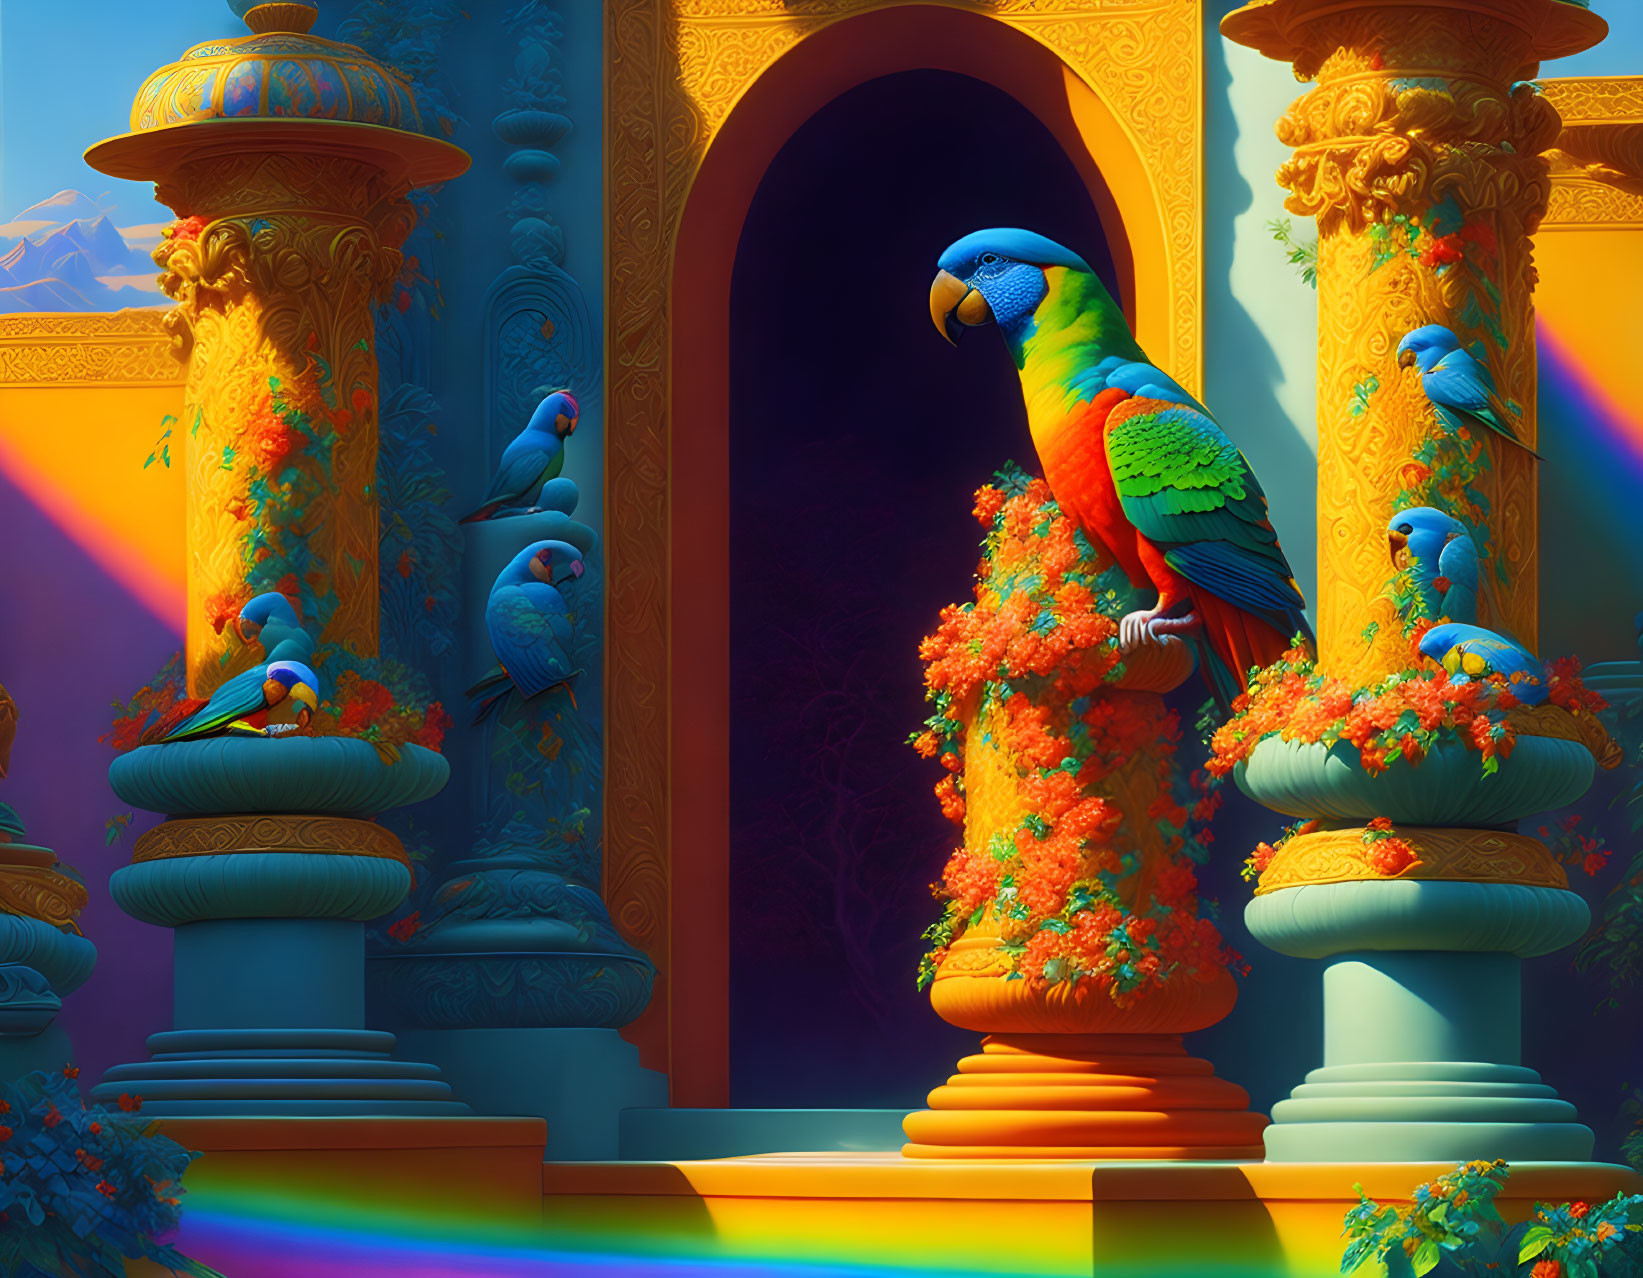 Colorful digital art: Blue-and-yellow macaws in ornate setting under warm sky